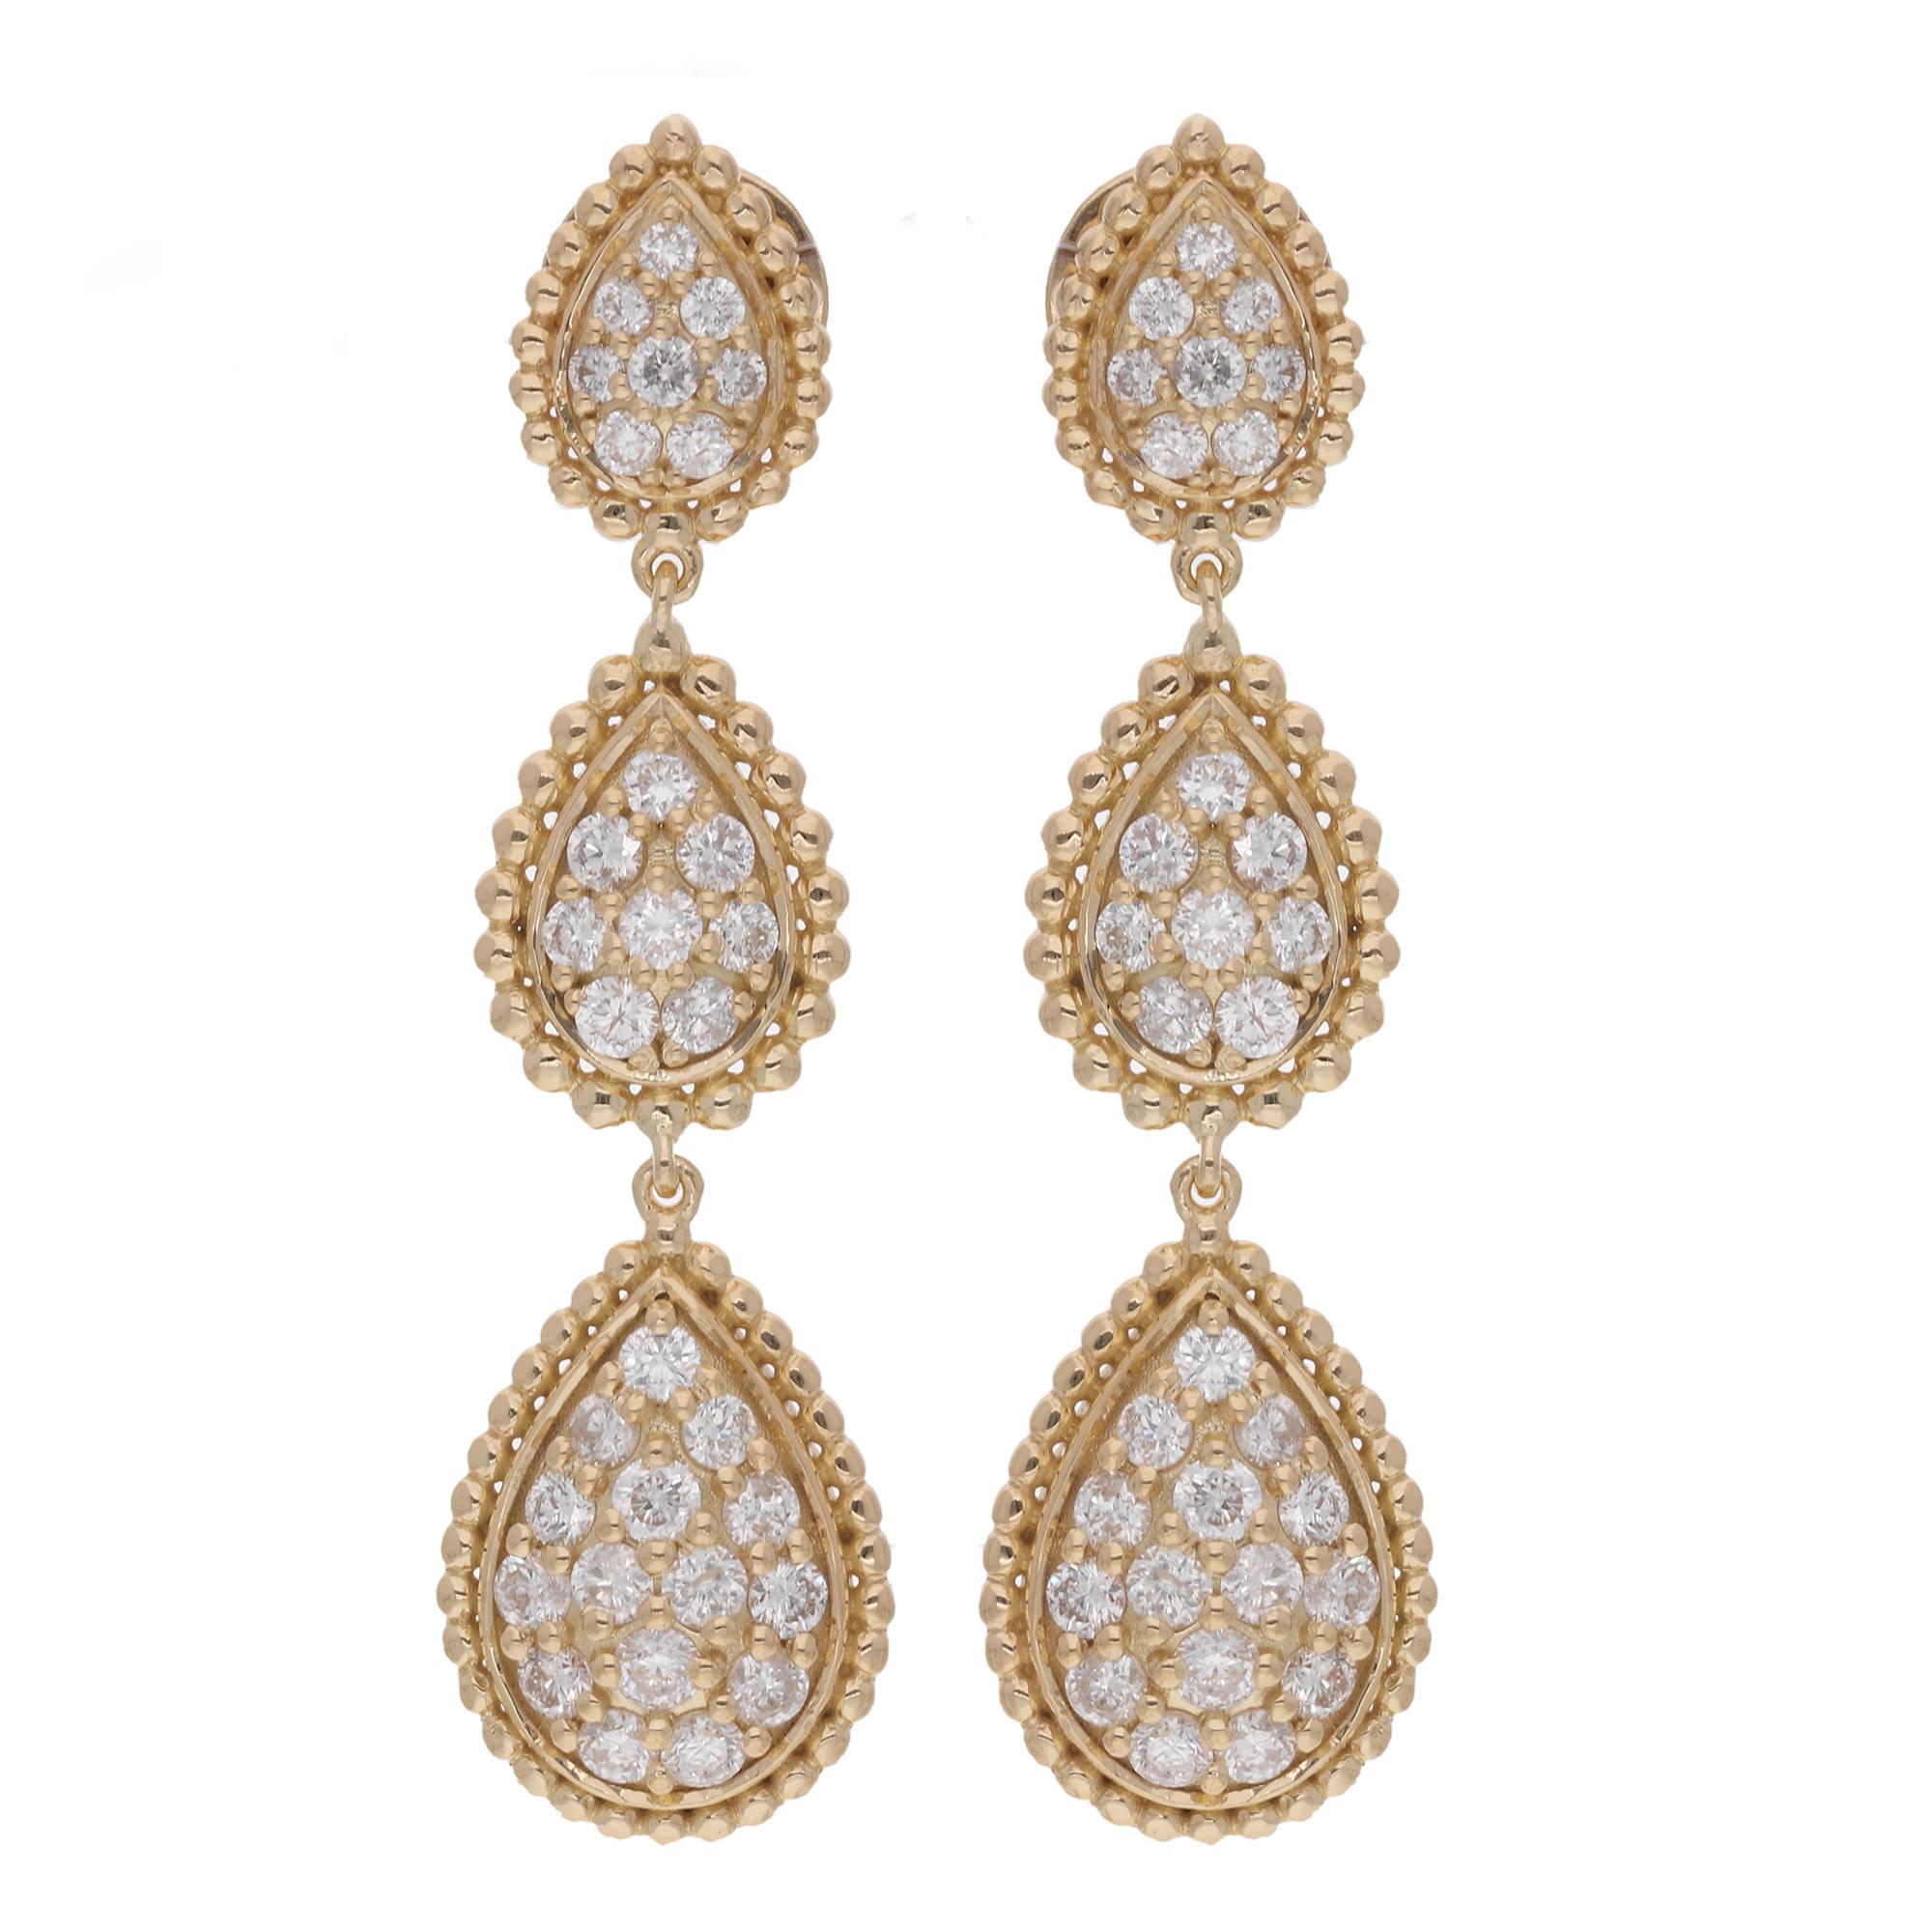 Round Cut Natural 1.75 Carat Diamond Pave Tear Drop Earrings 14 Karat Yellow Gold Jewelry For Sale